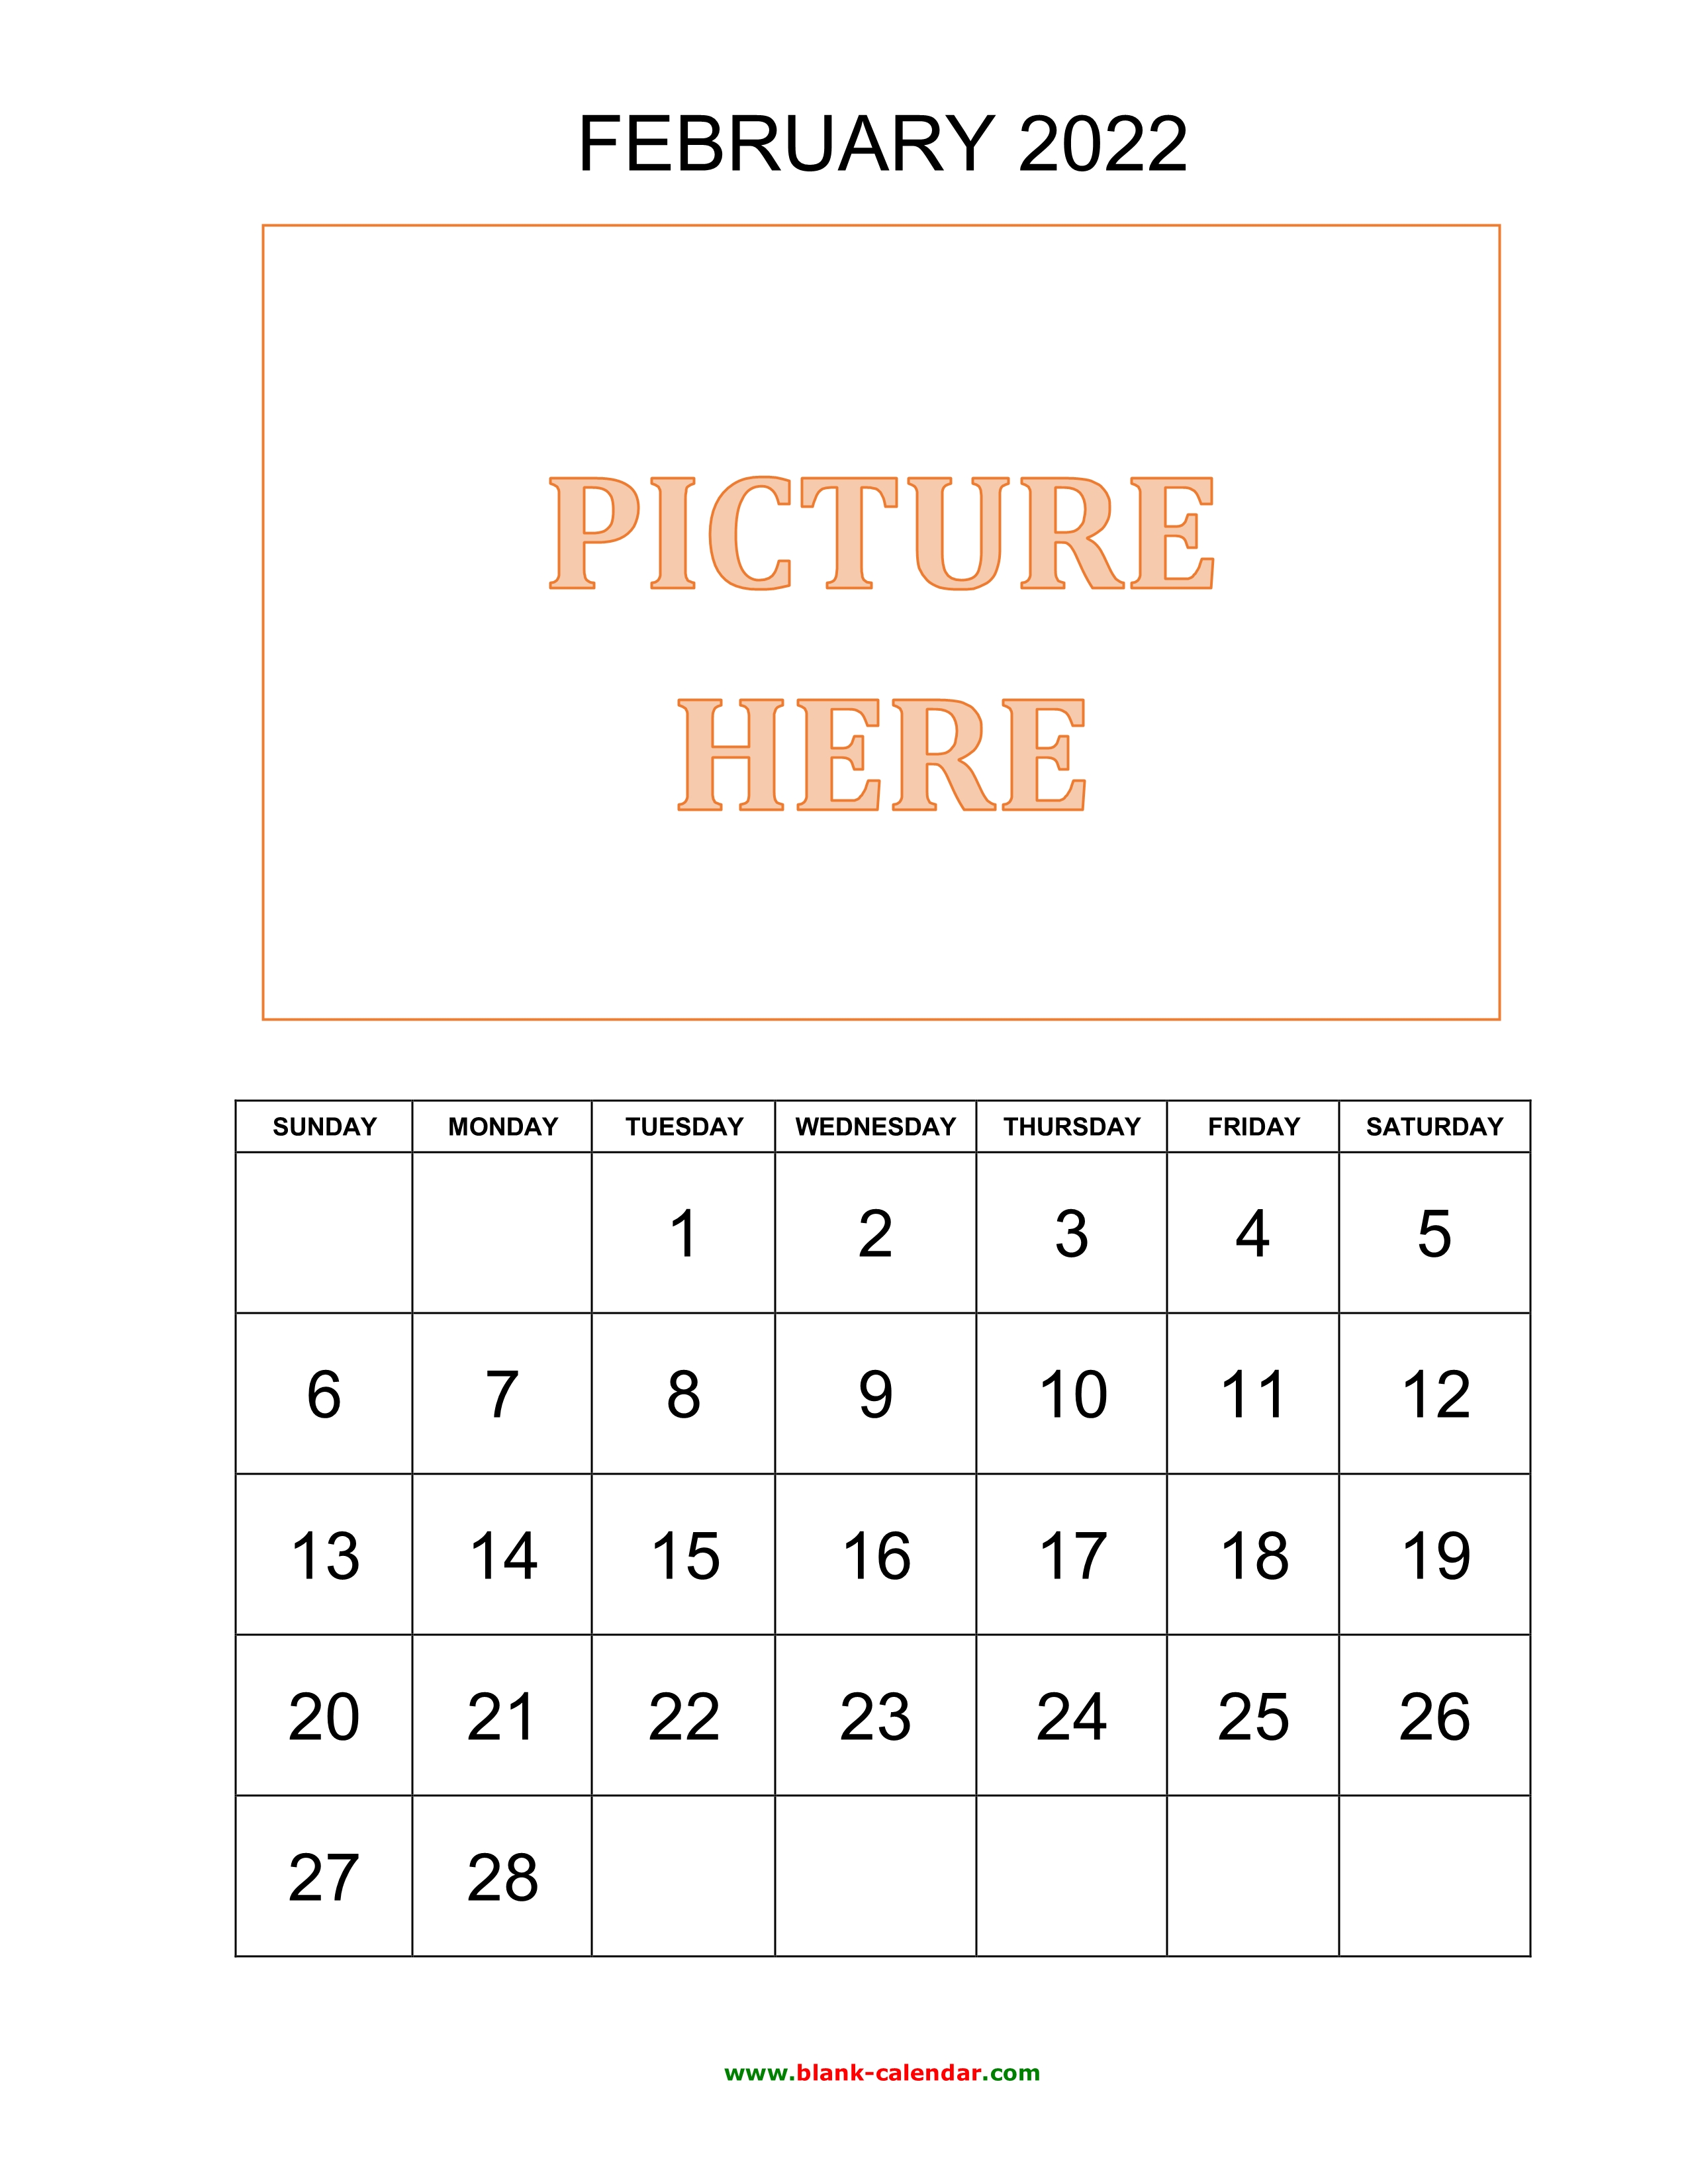 Free Download Printable February 2022 Calendar, Pictures Can Be Placed At The Top